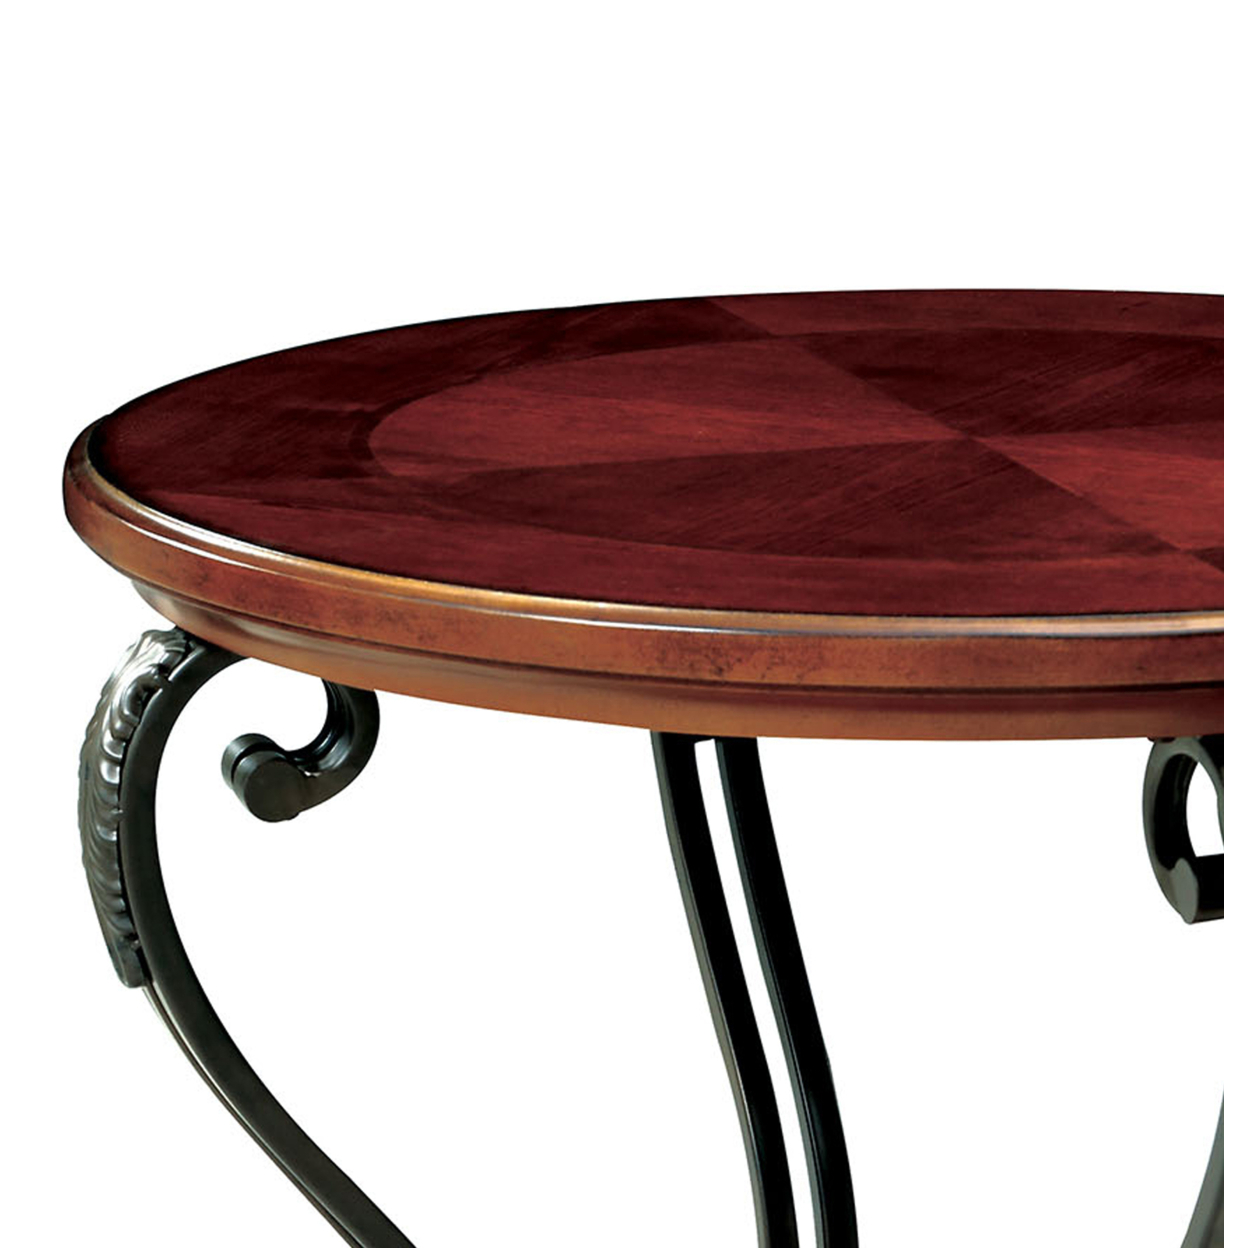 Round Wood And Metal End Table With Scroll Details, Brown- Saltoro Sherpi